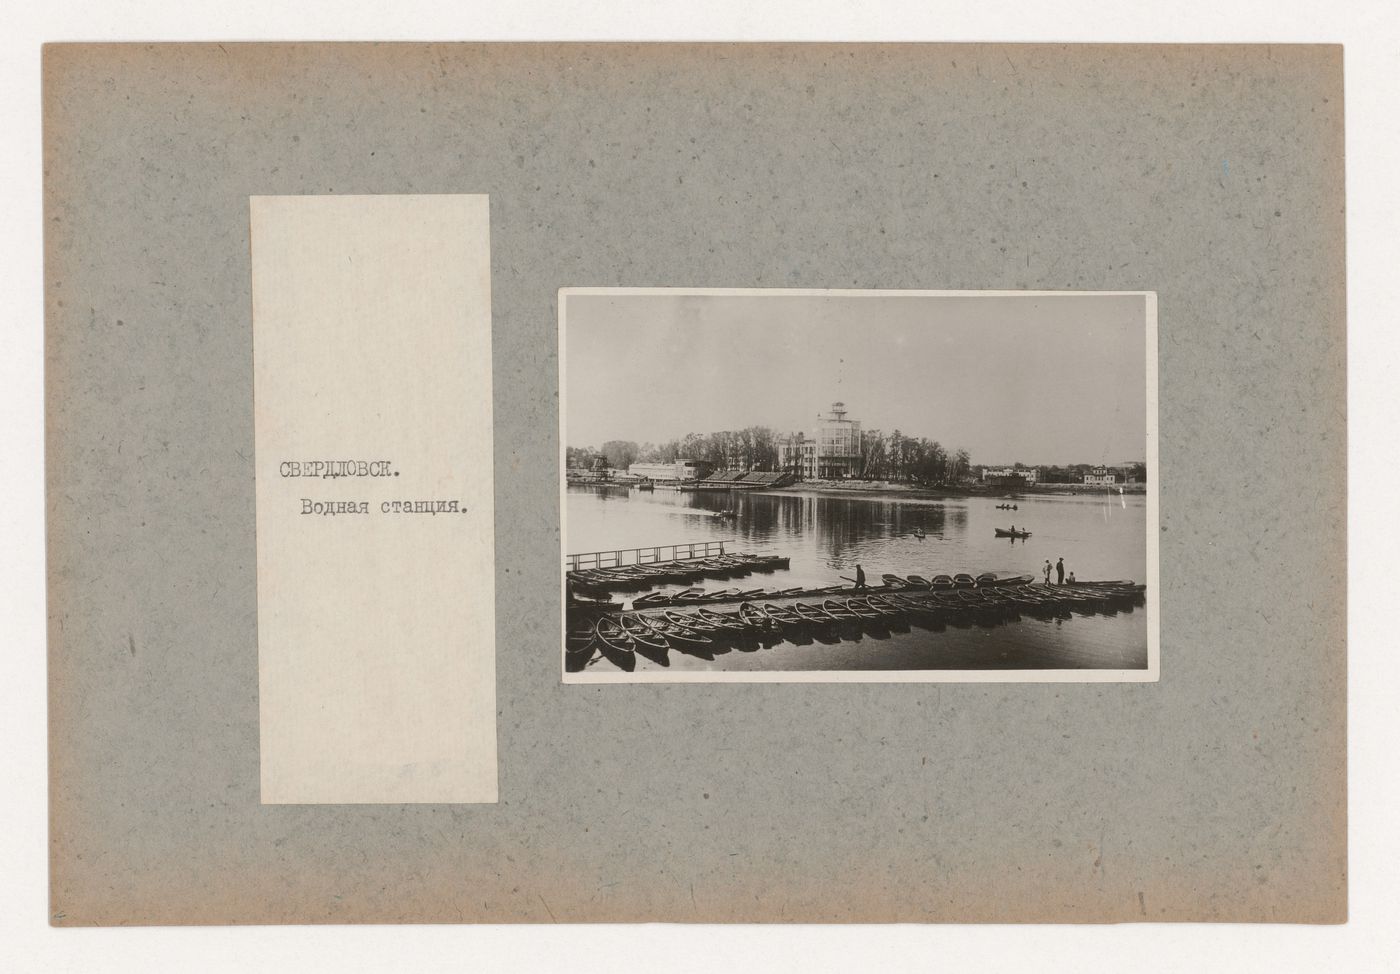 View of the Dinamo water sports station from across the pond showing boats at the pier, Sverdlovsk, Soviet Union (now Ekaterinburg, Russia)